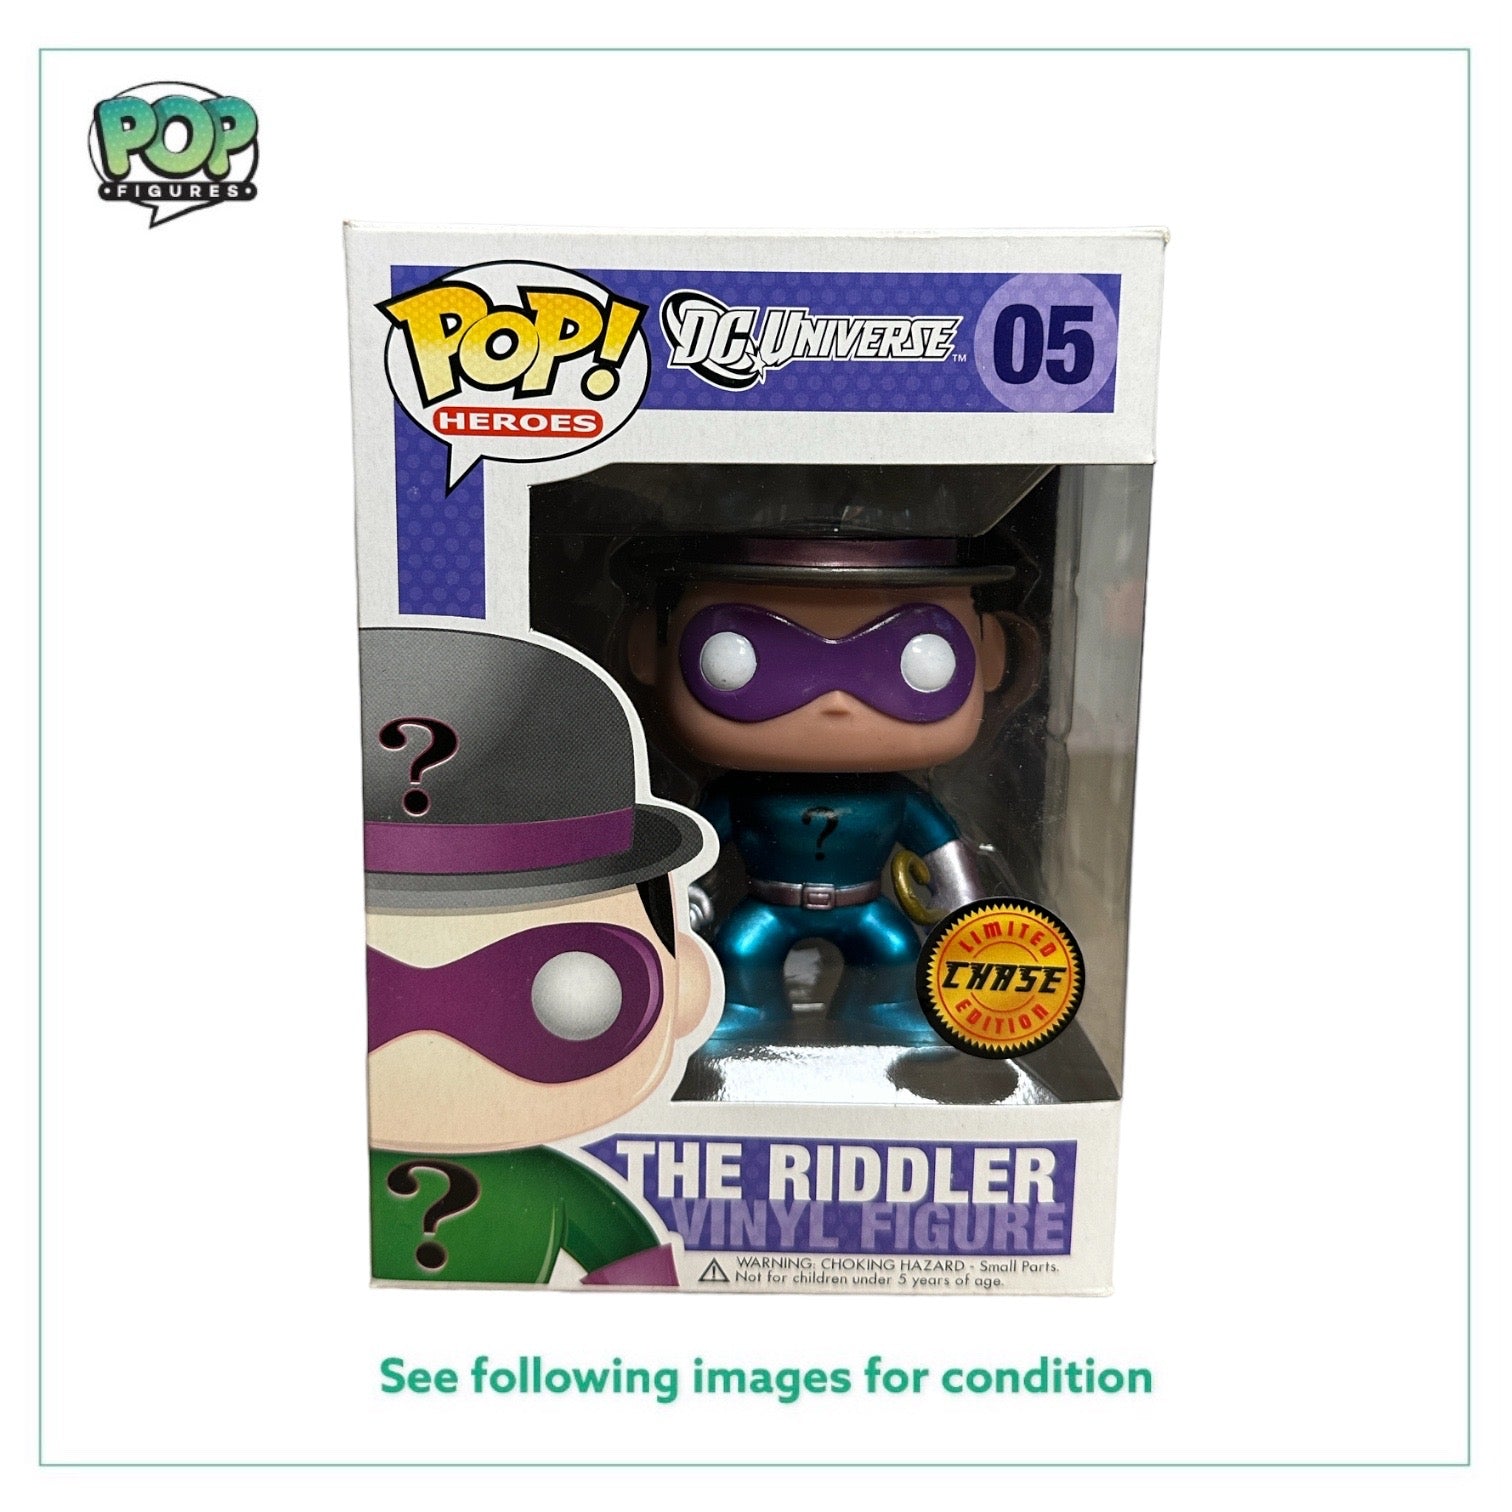 The Riddler #05 (Metallic Chase) Funko Pop! - DC Universe - Condition 8.25/10